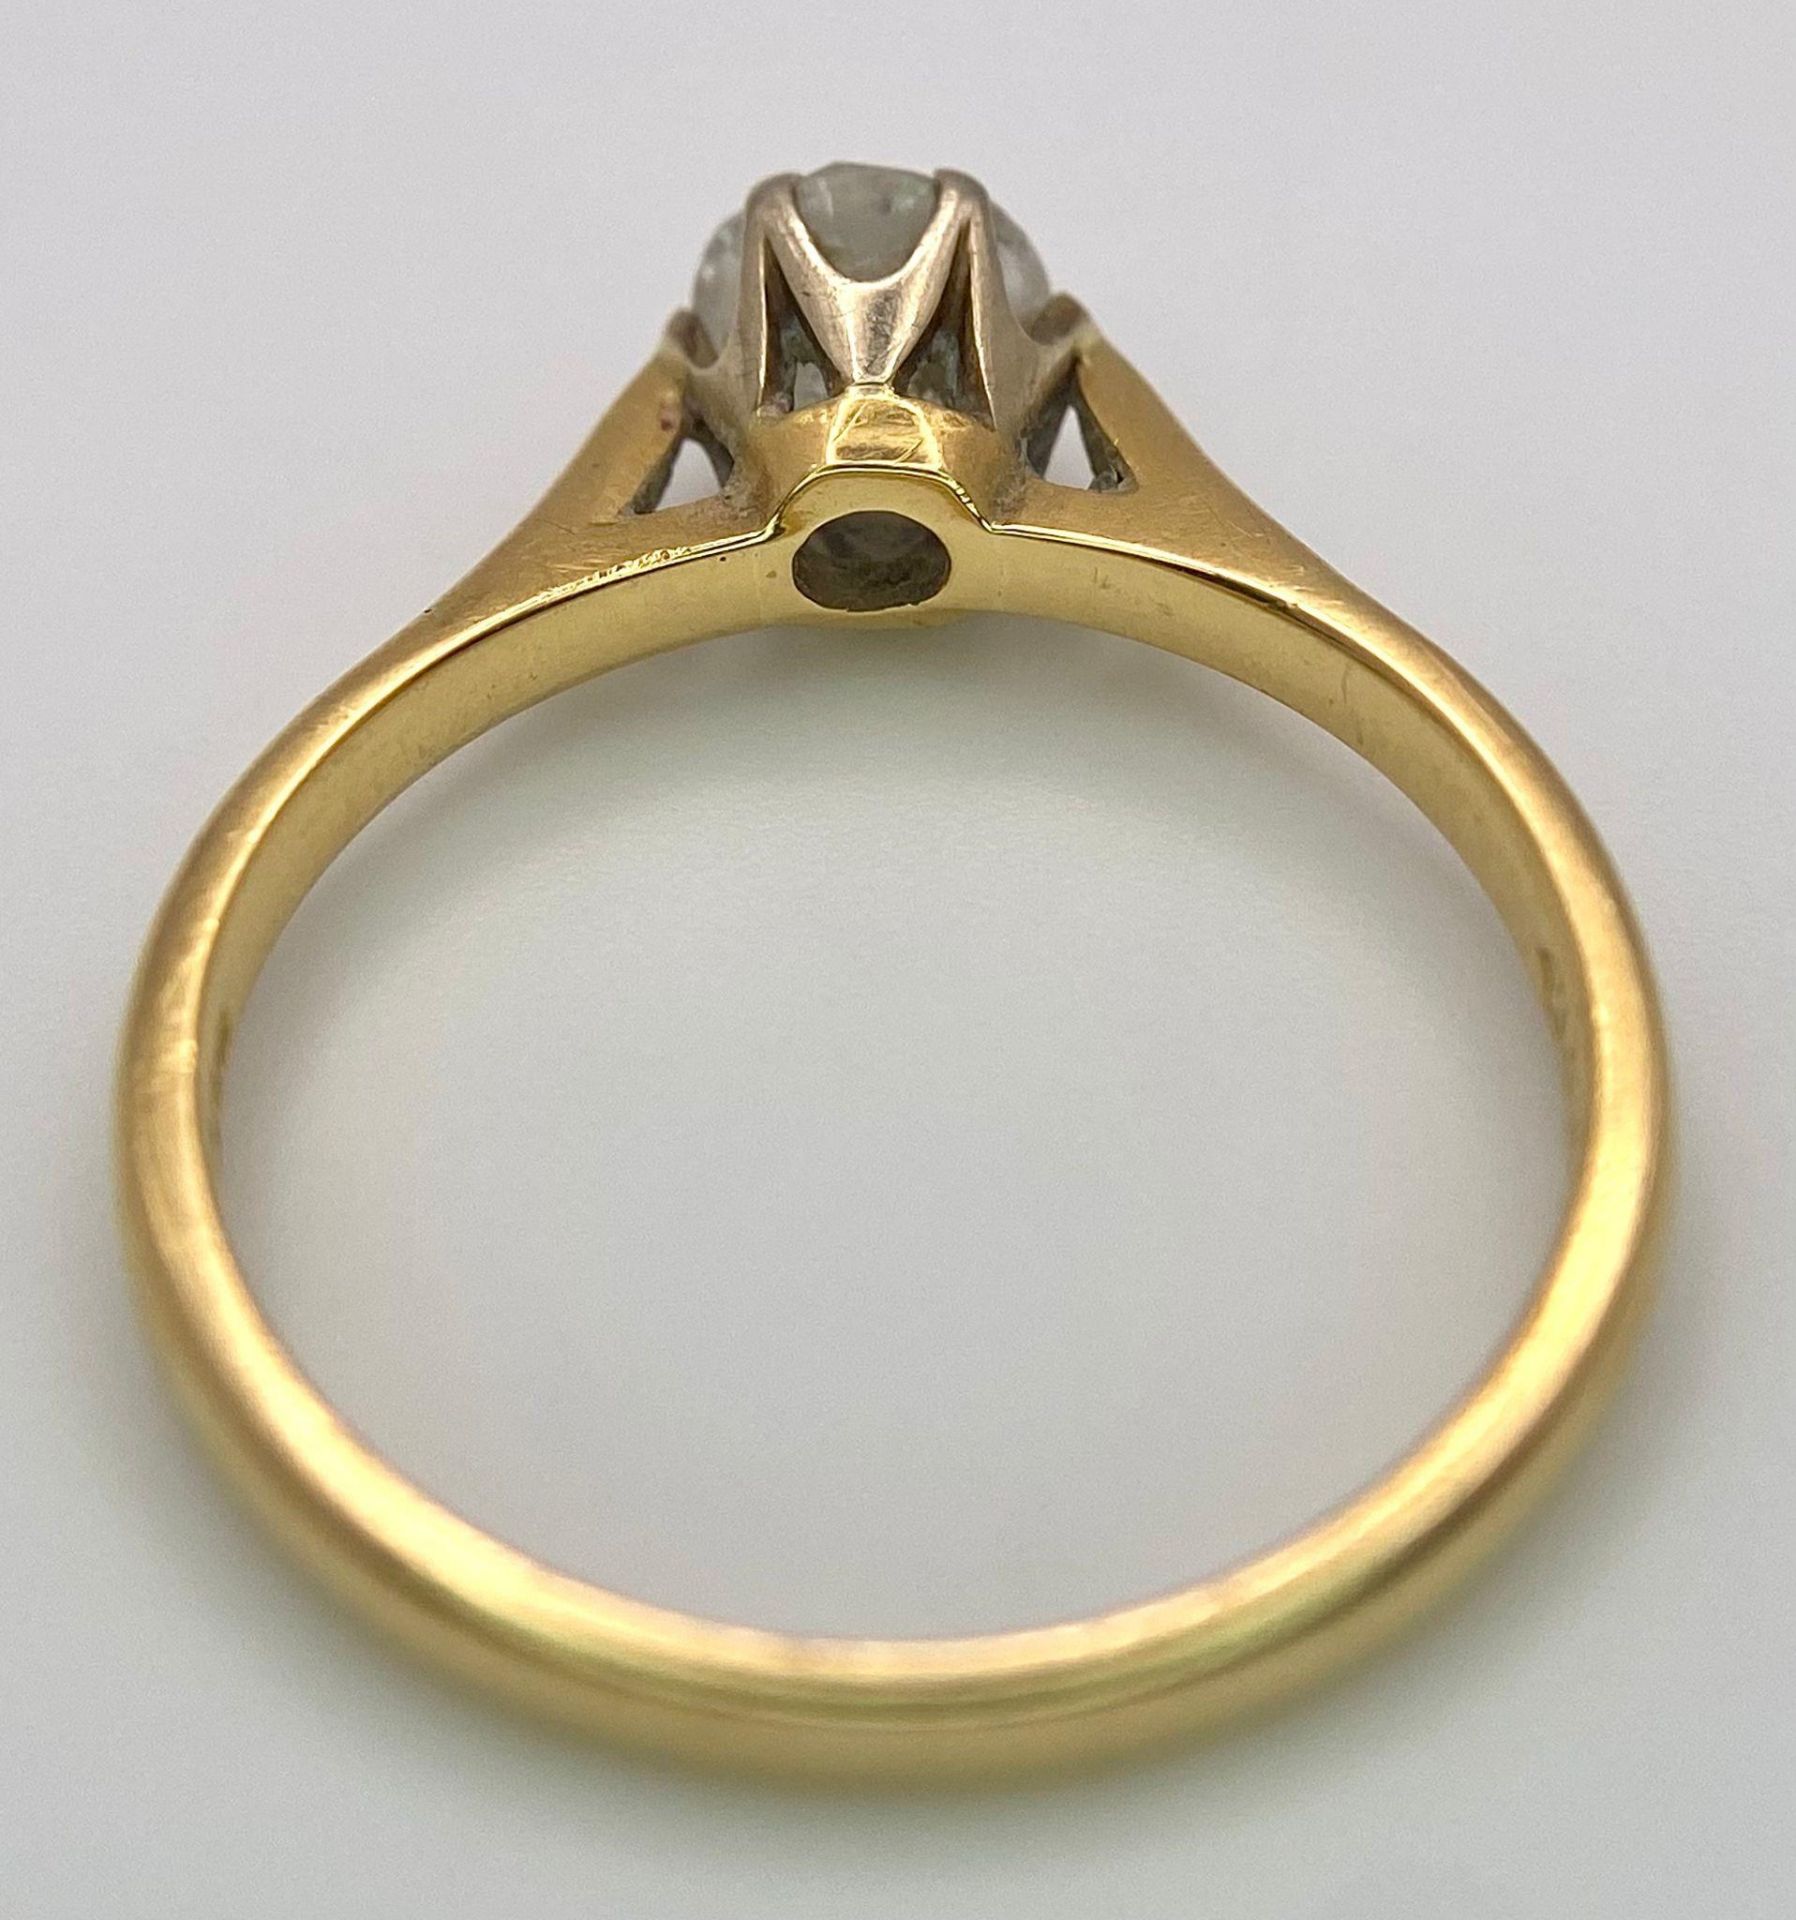 An 18K Yellow Gold Diamond Solitaire Ring. 0.75ct brilliant round cut diamond. Size N. 2.65g total - Image 5 of 6